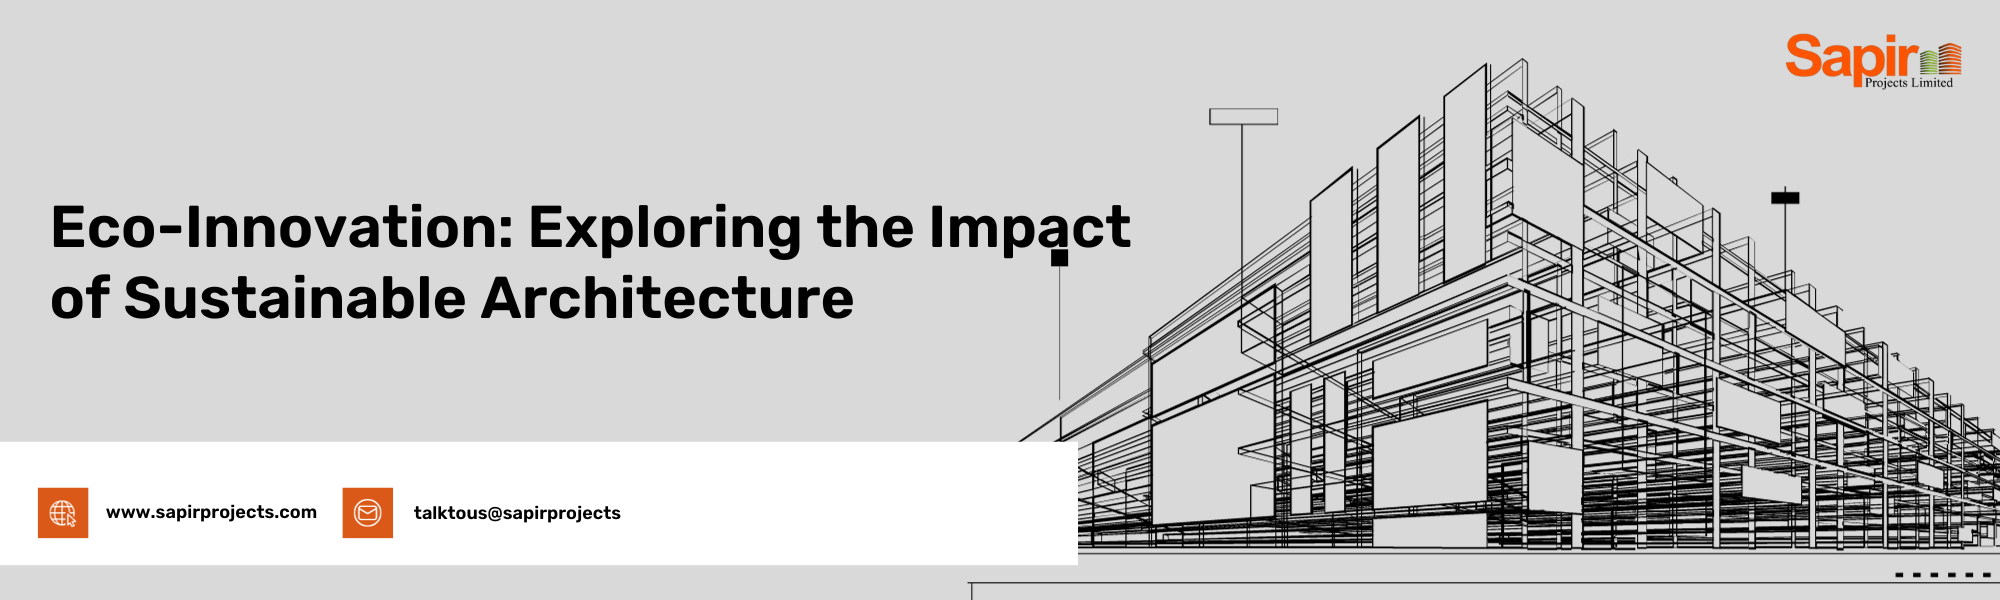 An image showing the structure of an architectural design